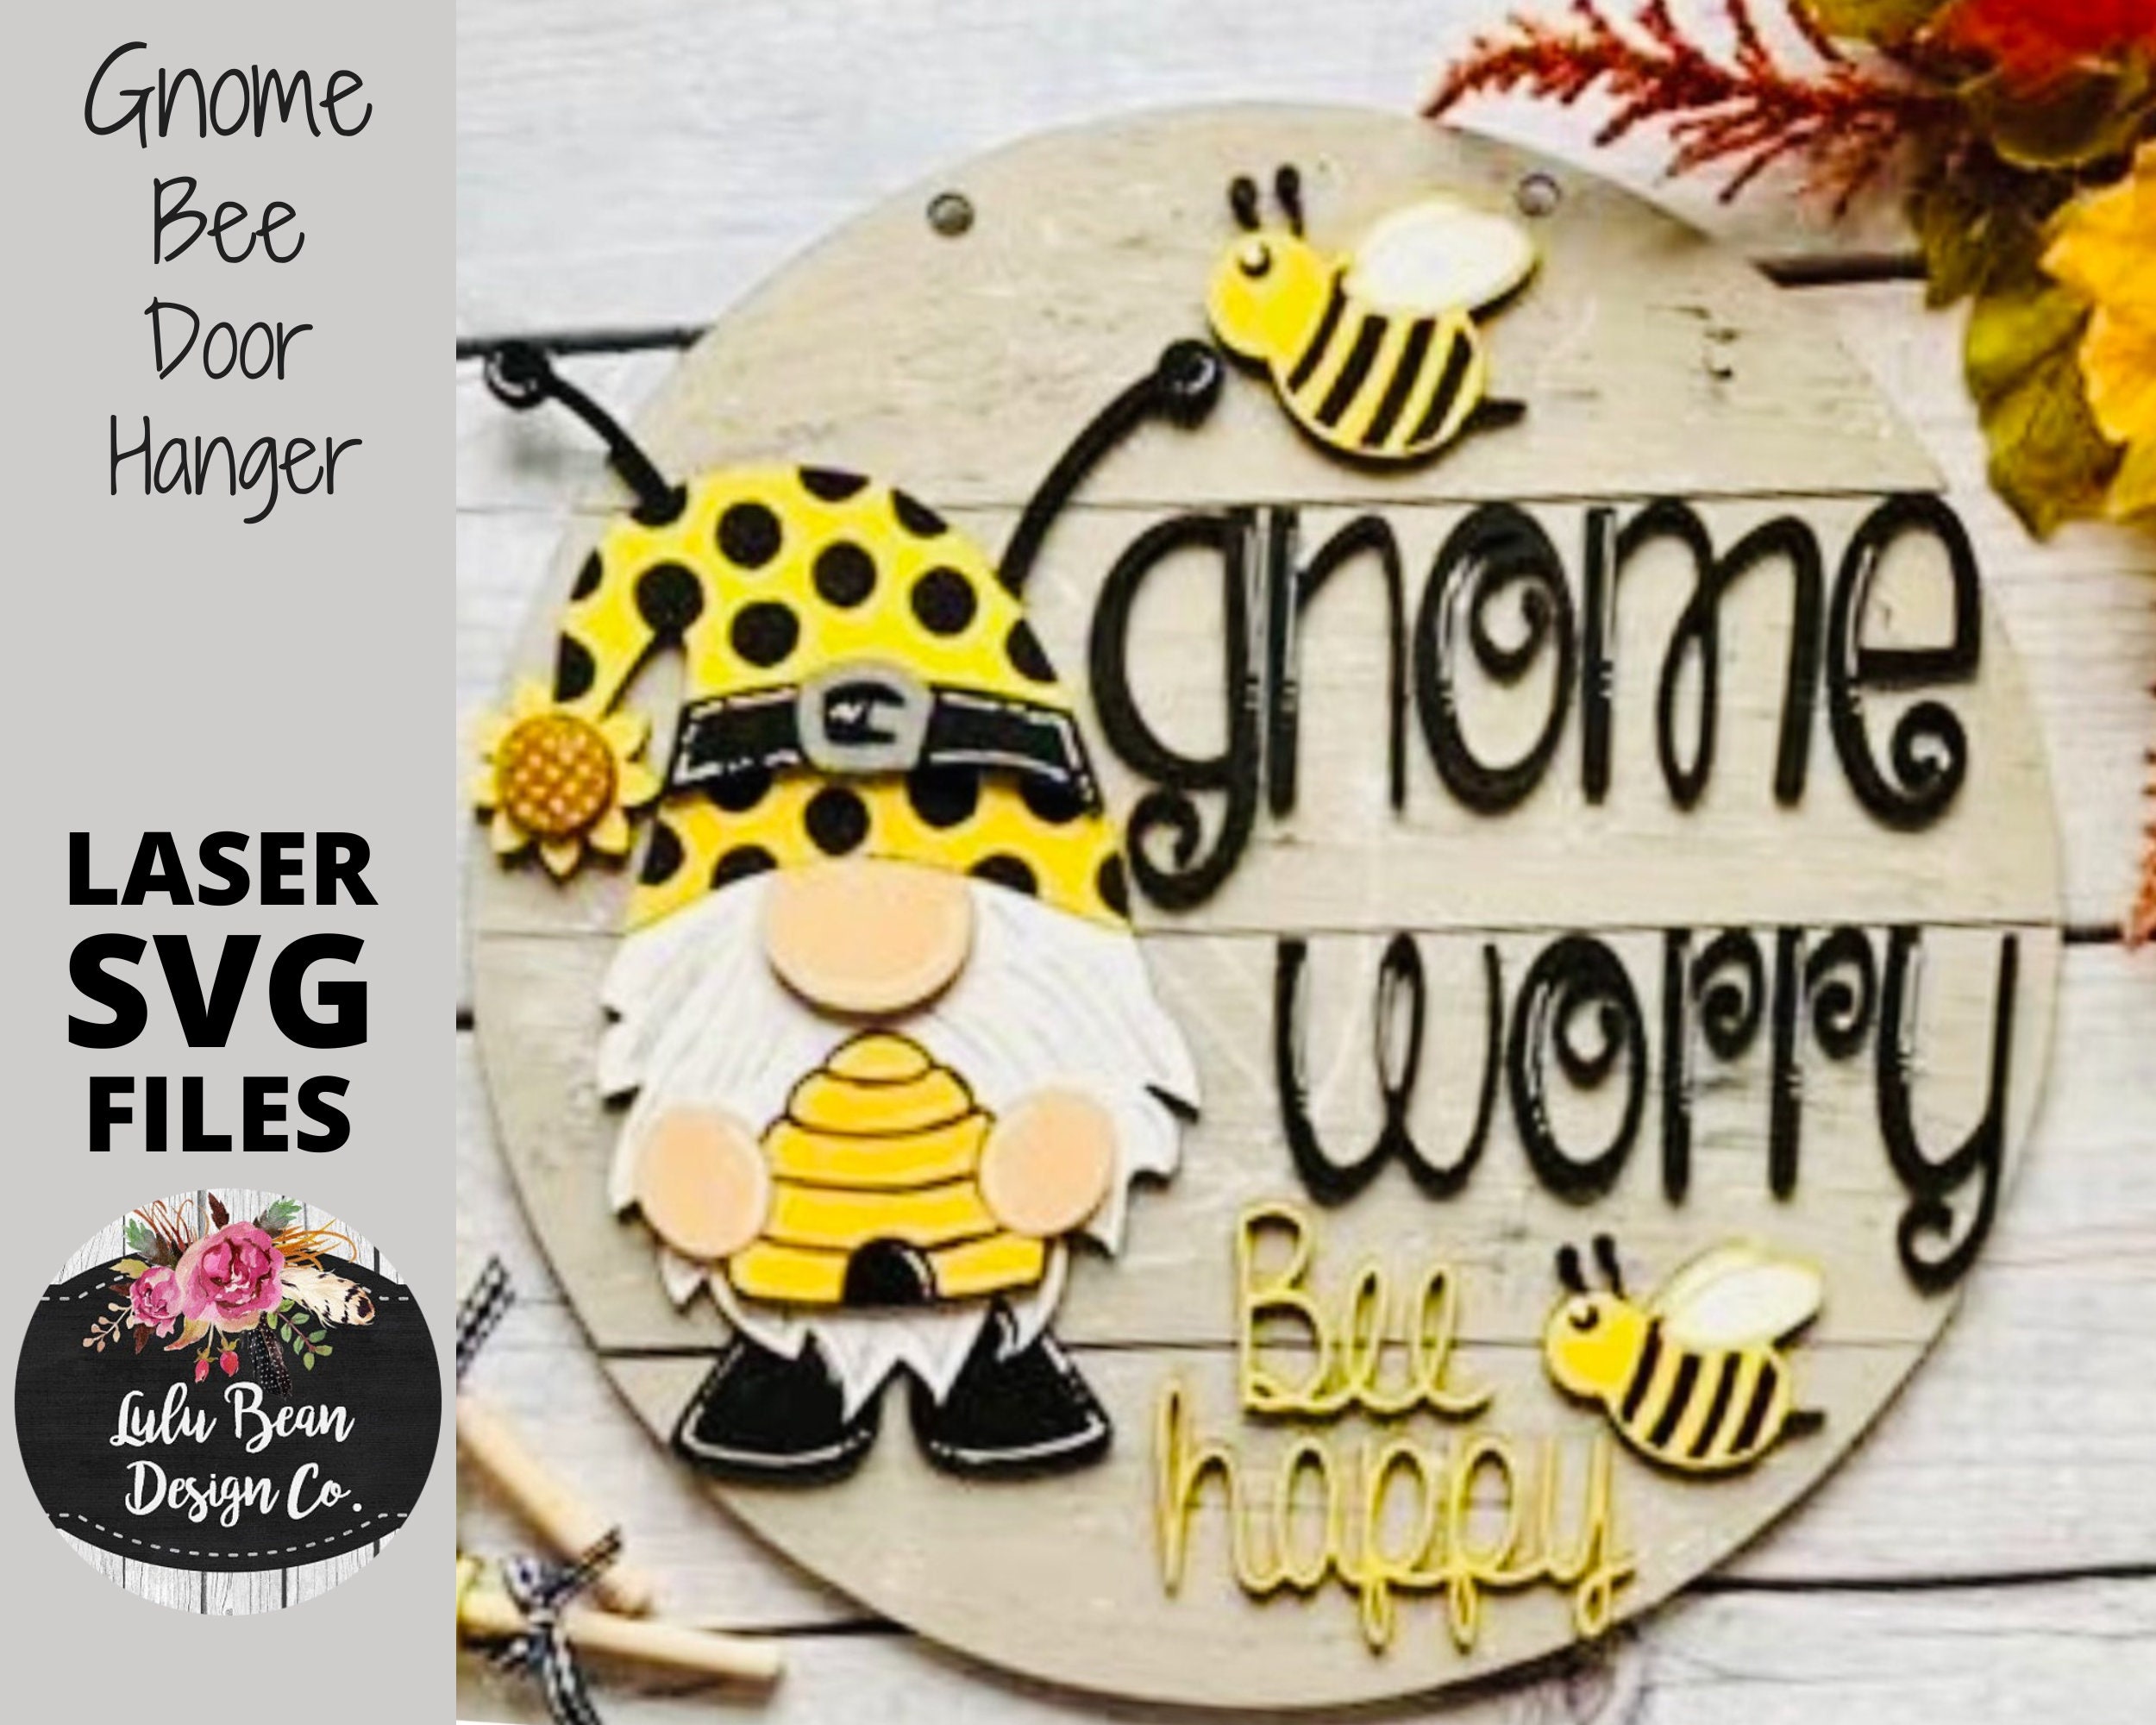  Bee Decorations, Spring Farmhouse Honey bee Tiered Tray  Decor,Bumble Bee Gnome Plush,3X Bee Sign, Mini Bee Hive, Wood Bead  Garland,Rustic Farmhouse Kitchen Table : Home & Kitchen